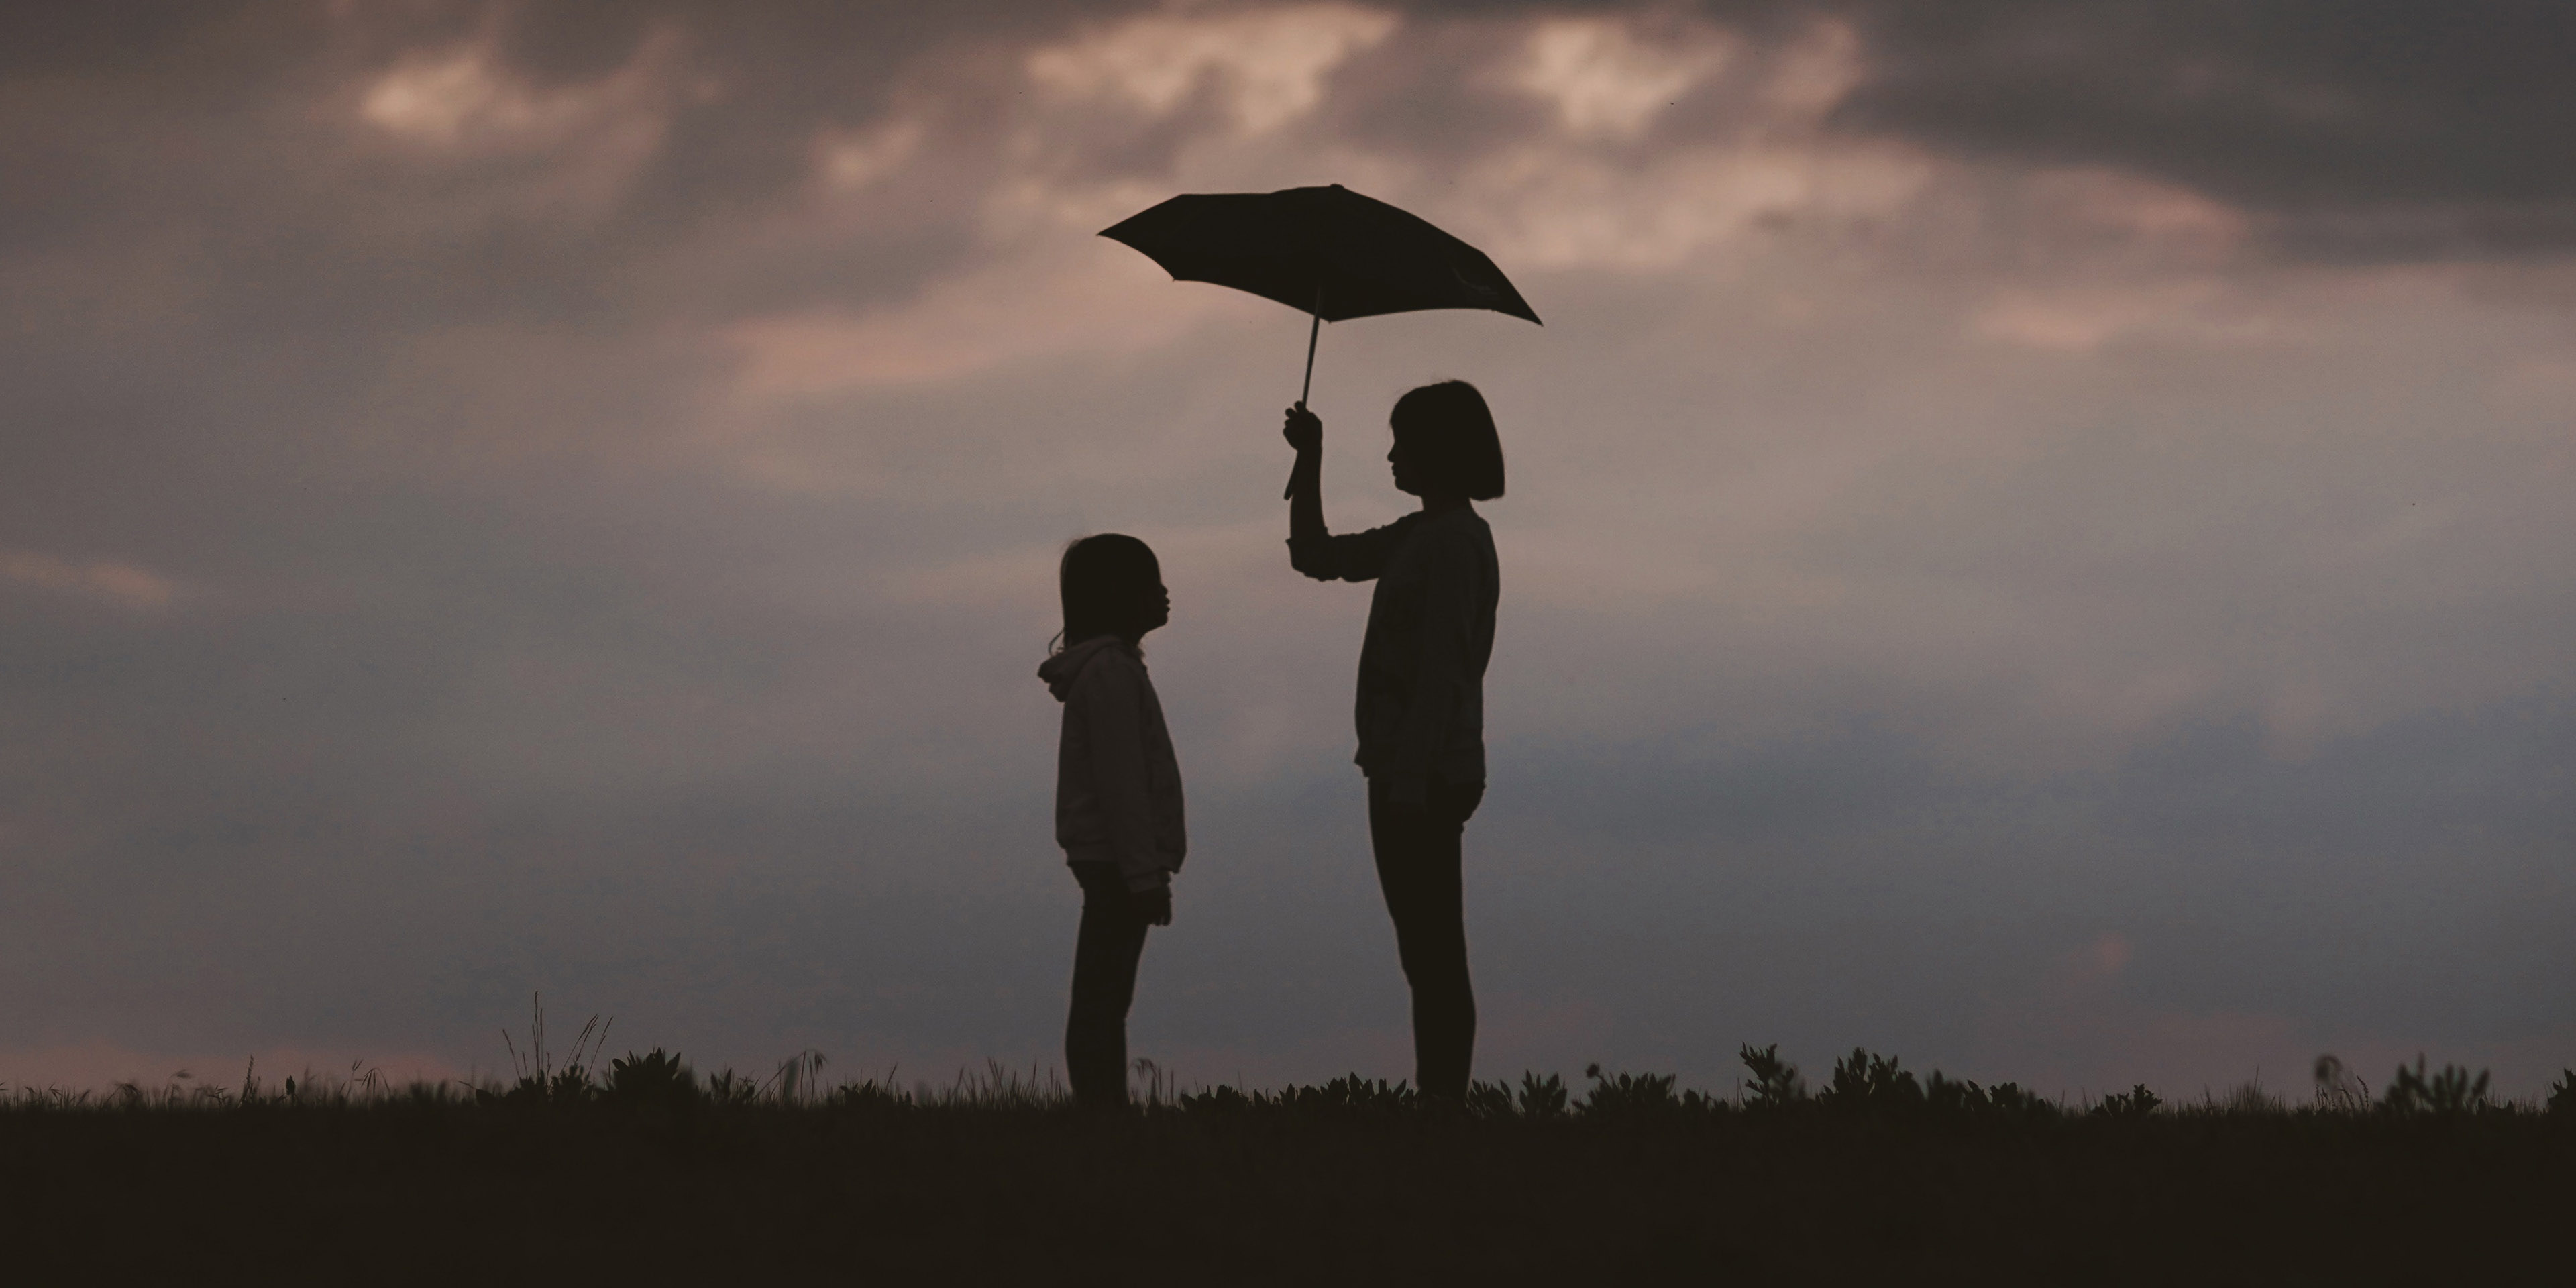 An older child holding an umbrella for a younger child.